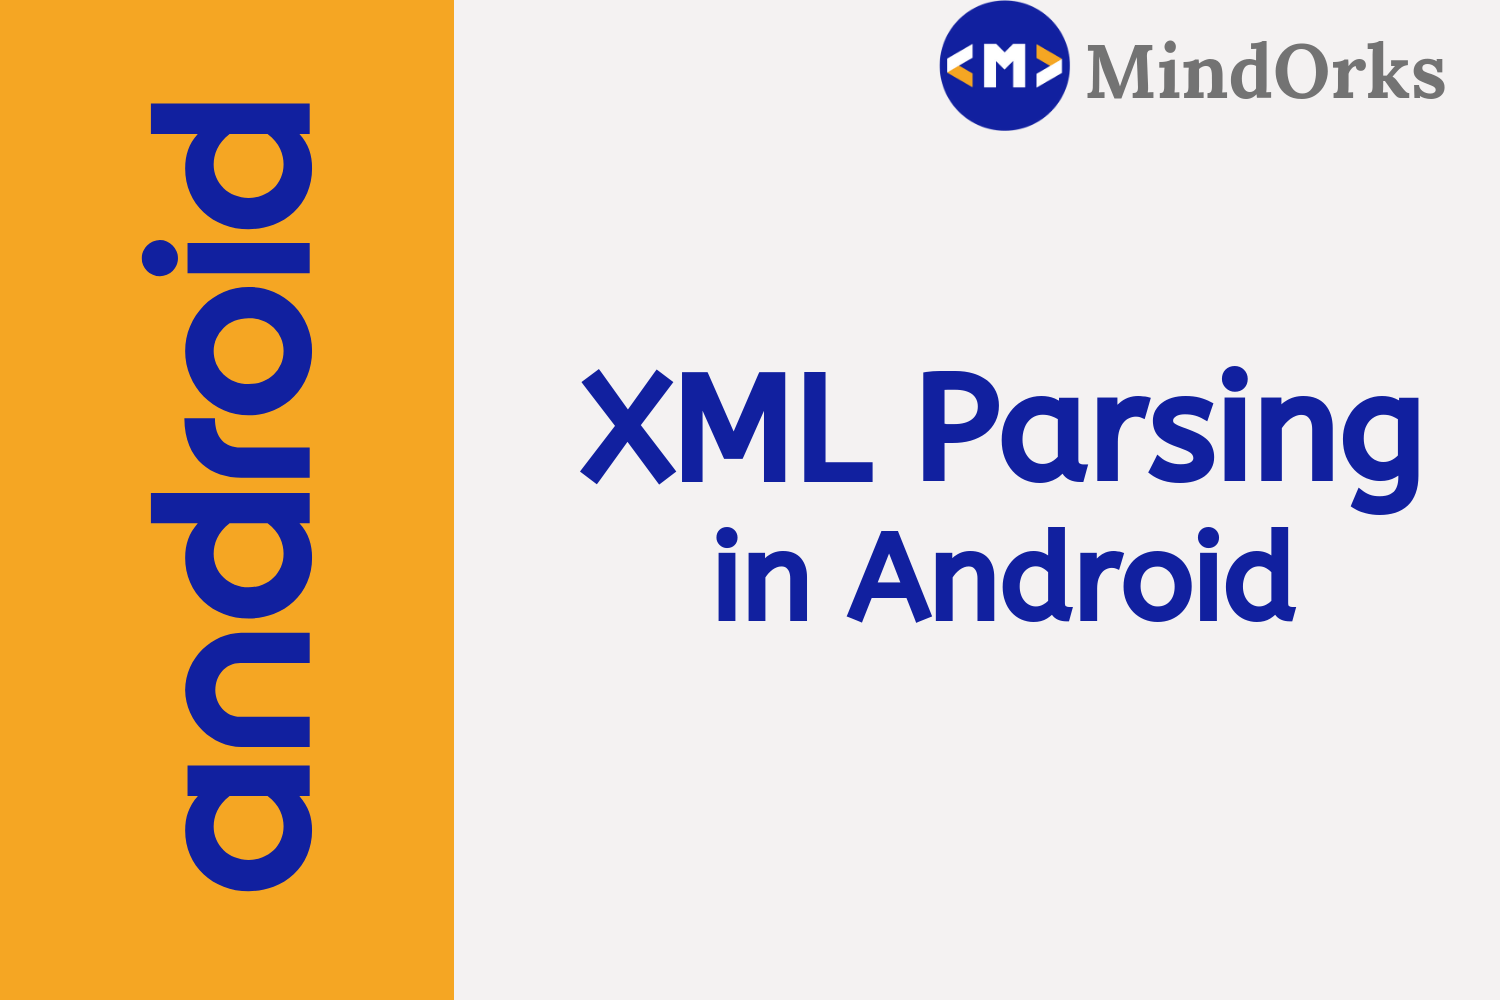 Processing and Parsing XML in Android